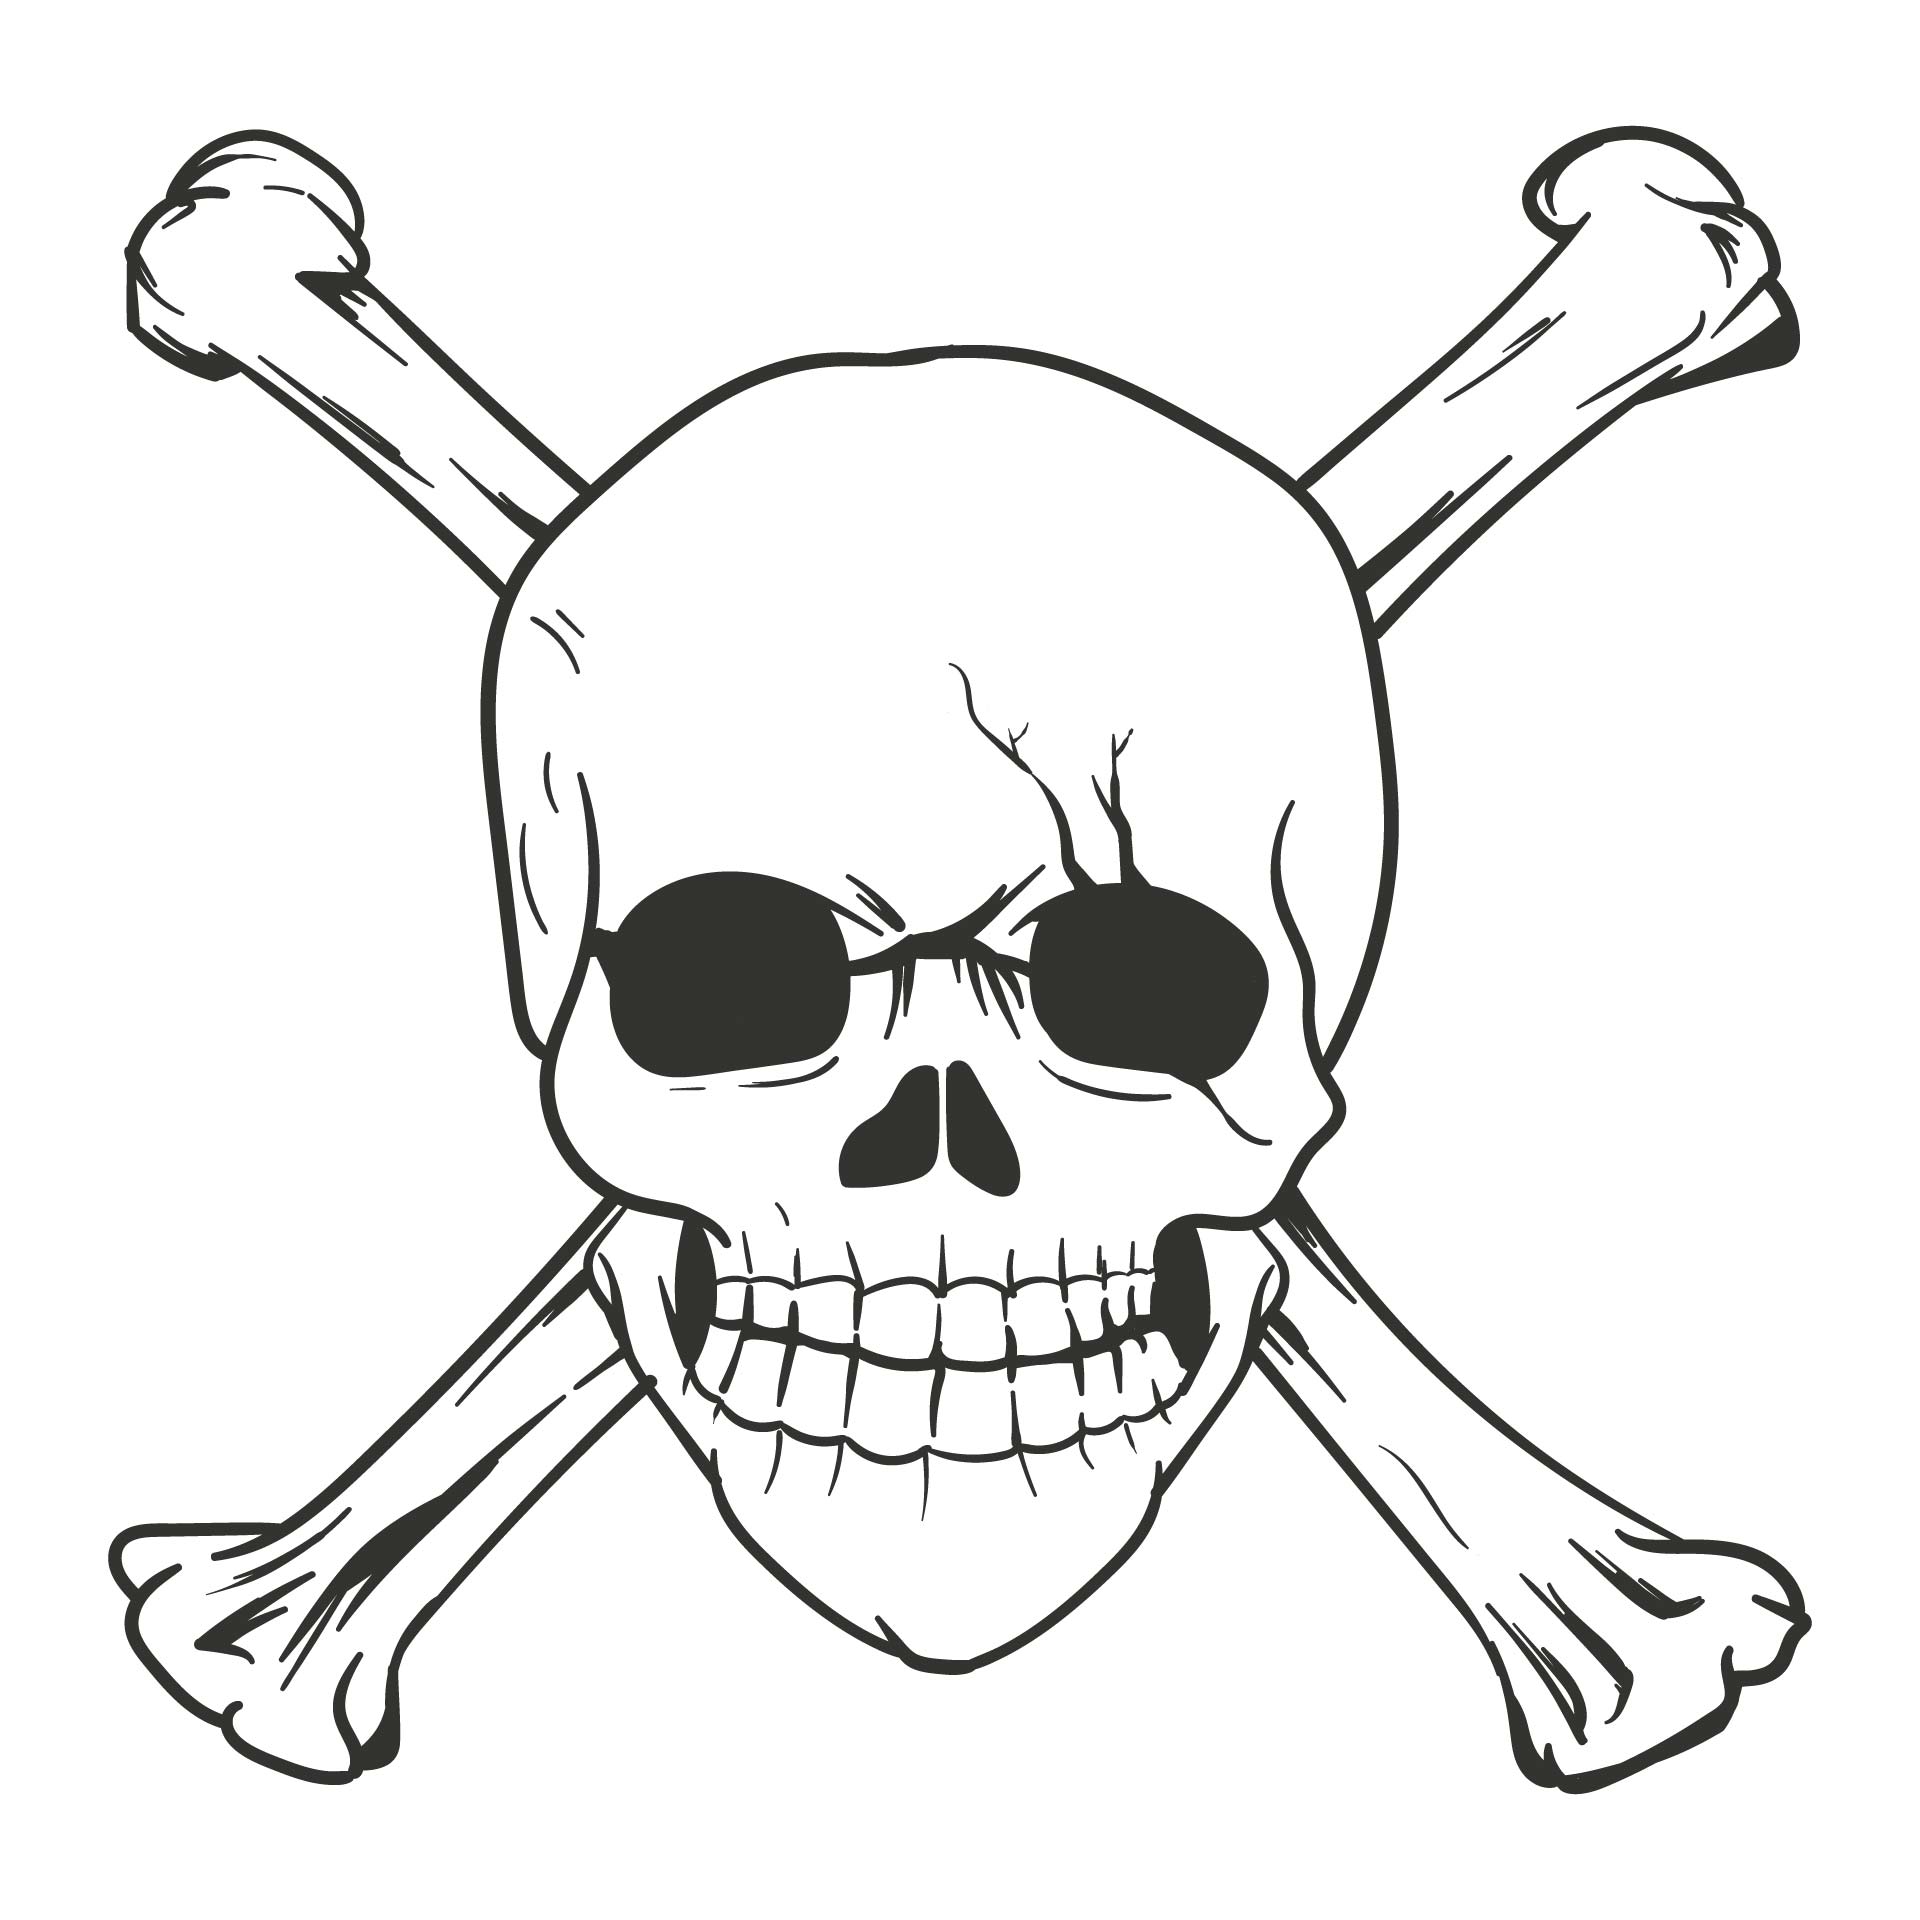 Best printable pirate skull and crossbones pdf for free at